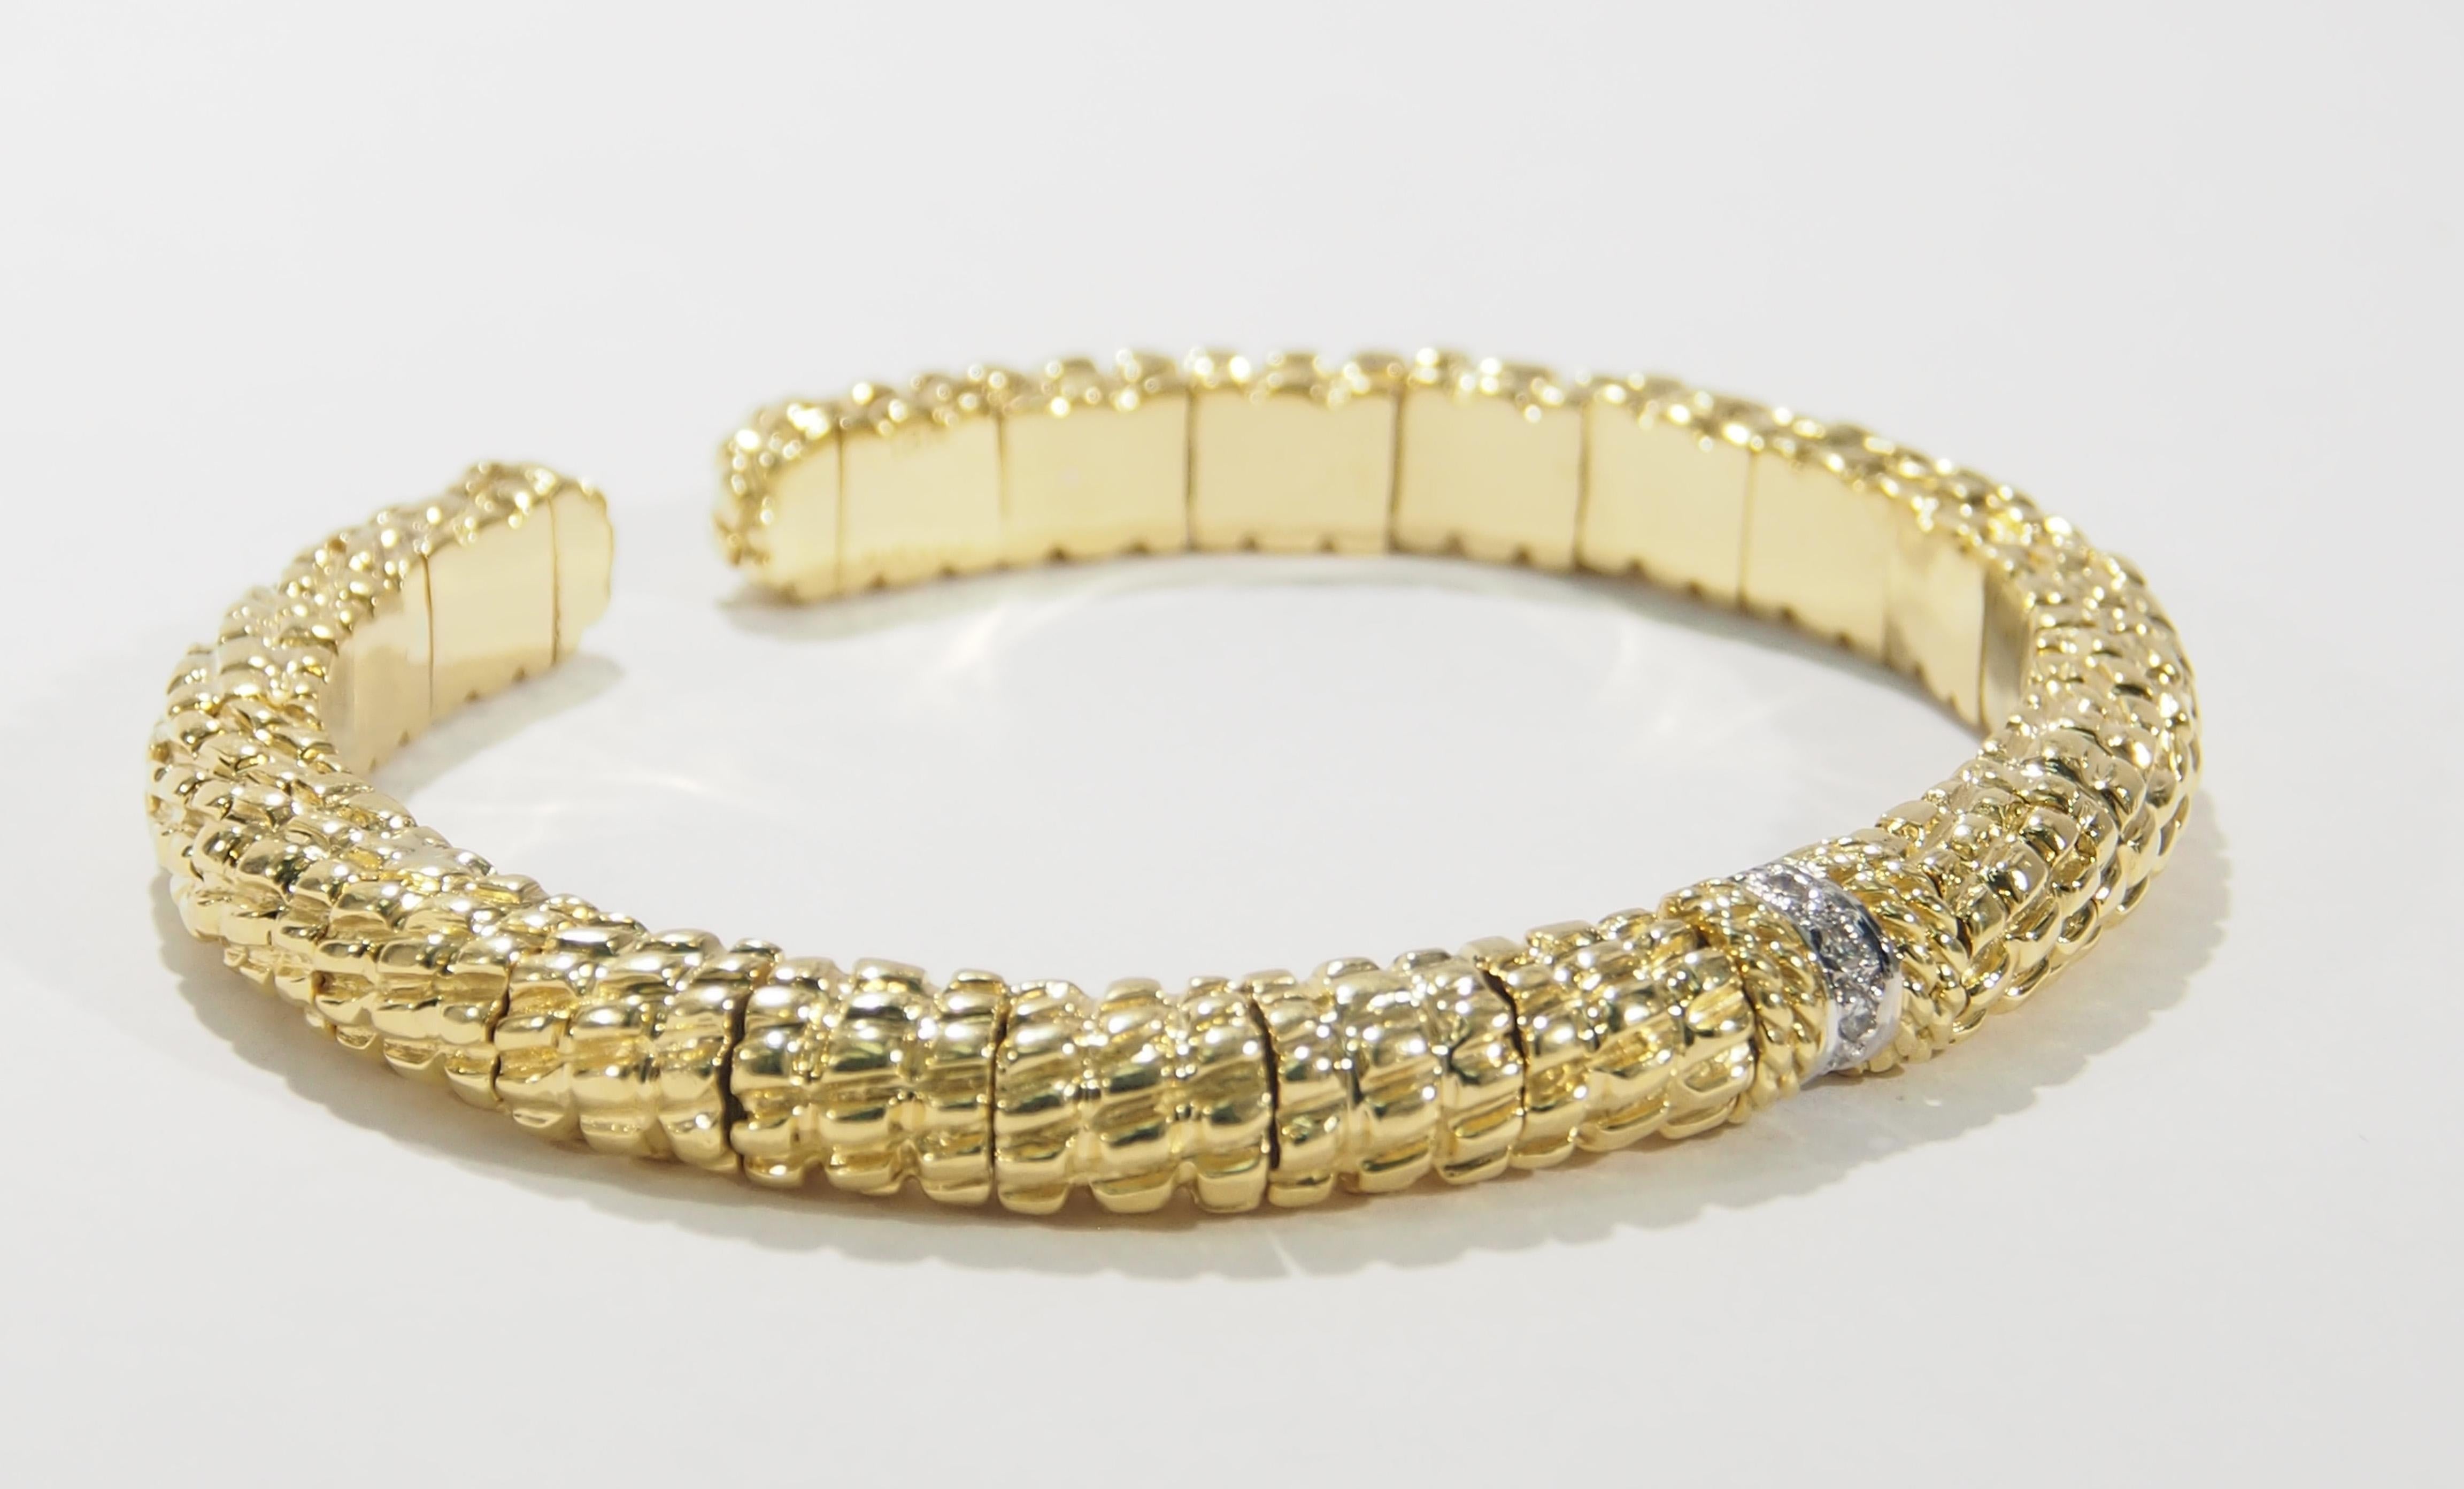 This is a stunning 18K Yellow Gold Bangle Bracelet from the Cassis Collection.  Known for their Textured 18K Yellow Gold this bracelet is both luxurious and comfortable as the Bangle is flexible. Accenting  the center are (6) Round Brilliant Cut